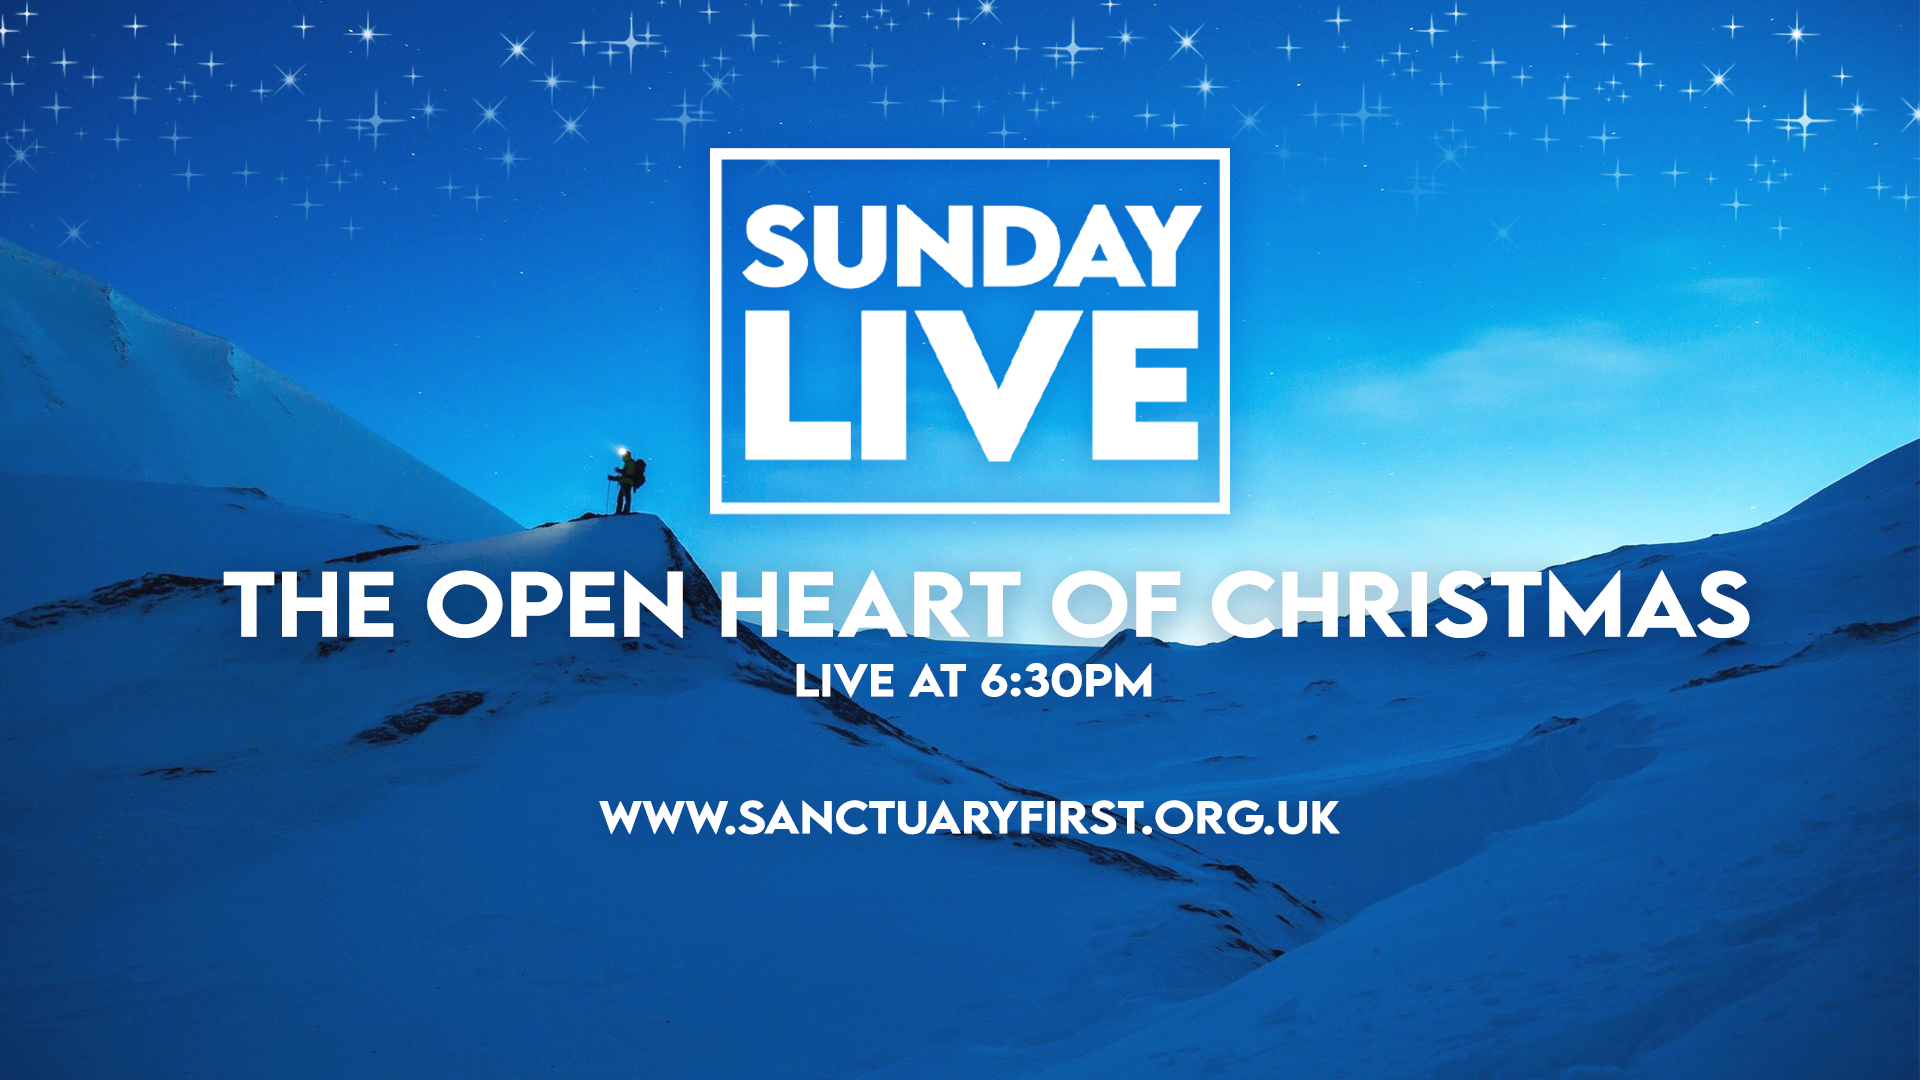 Sunday Live - The Open Heart of Christmas